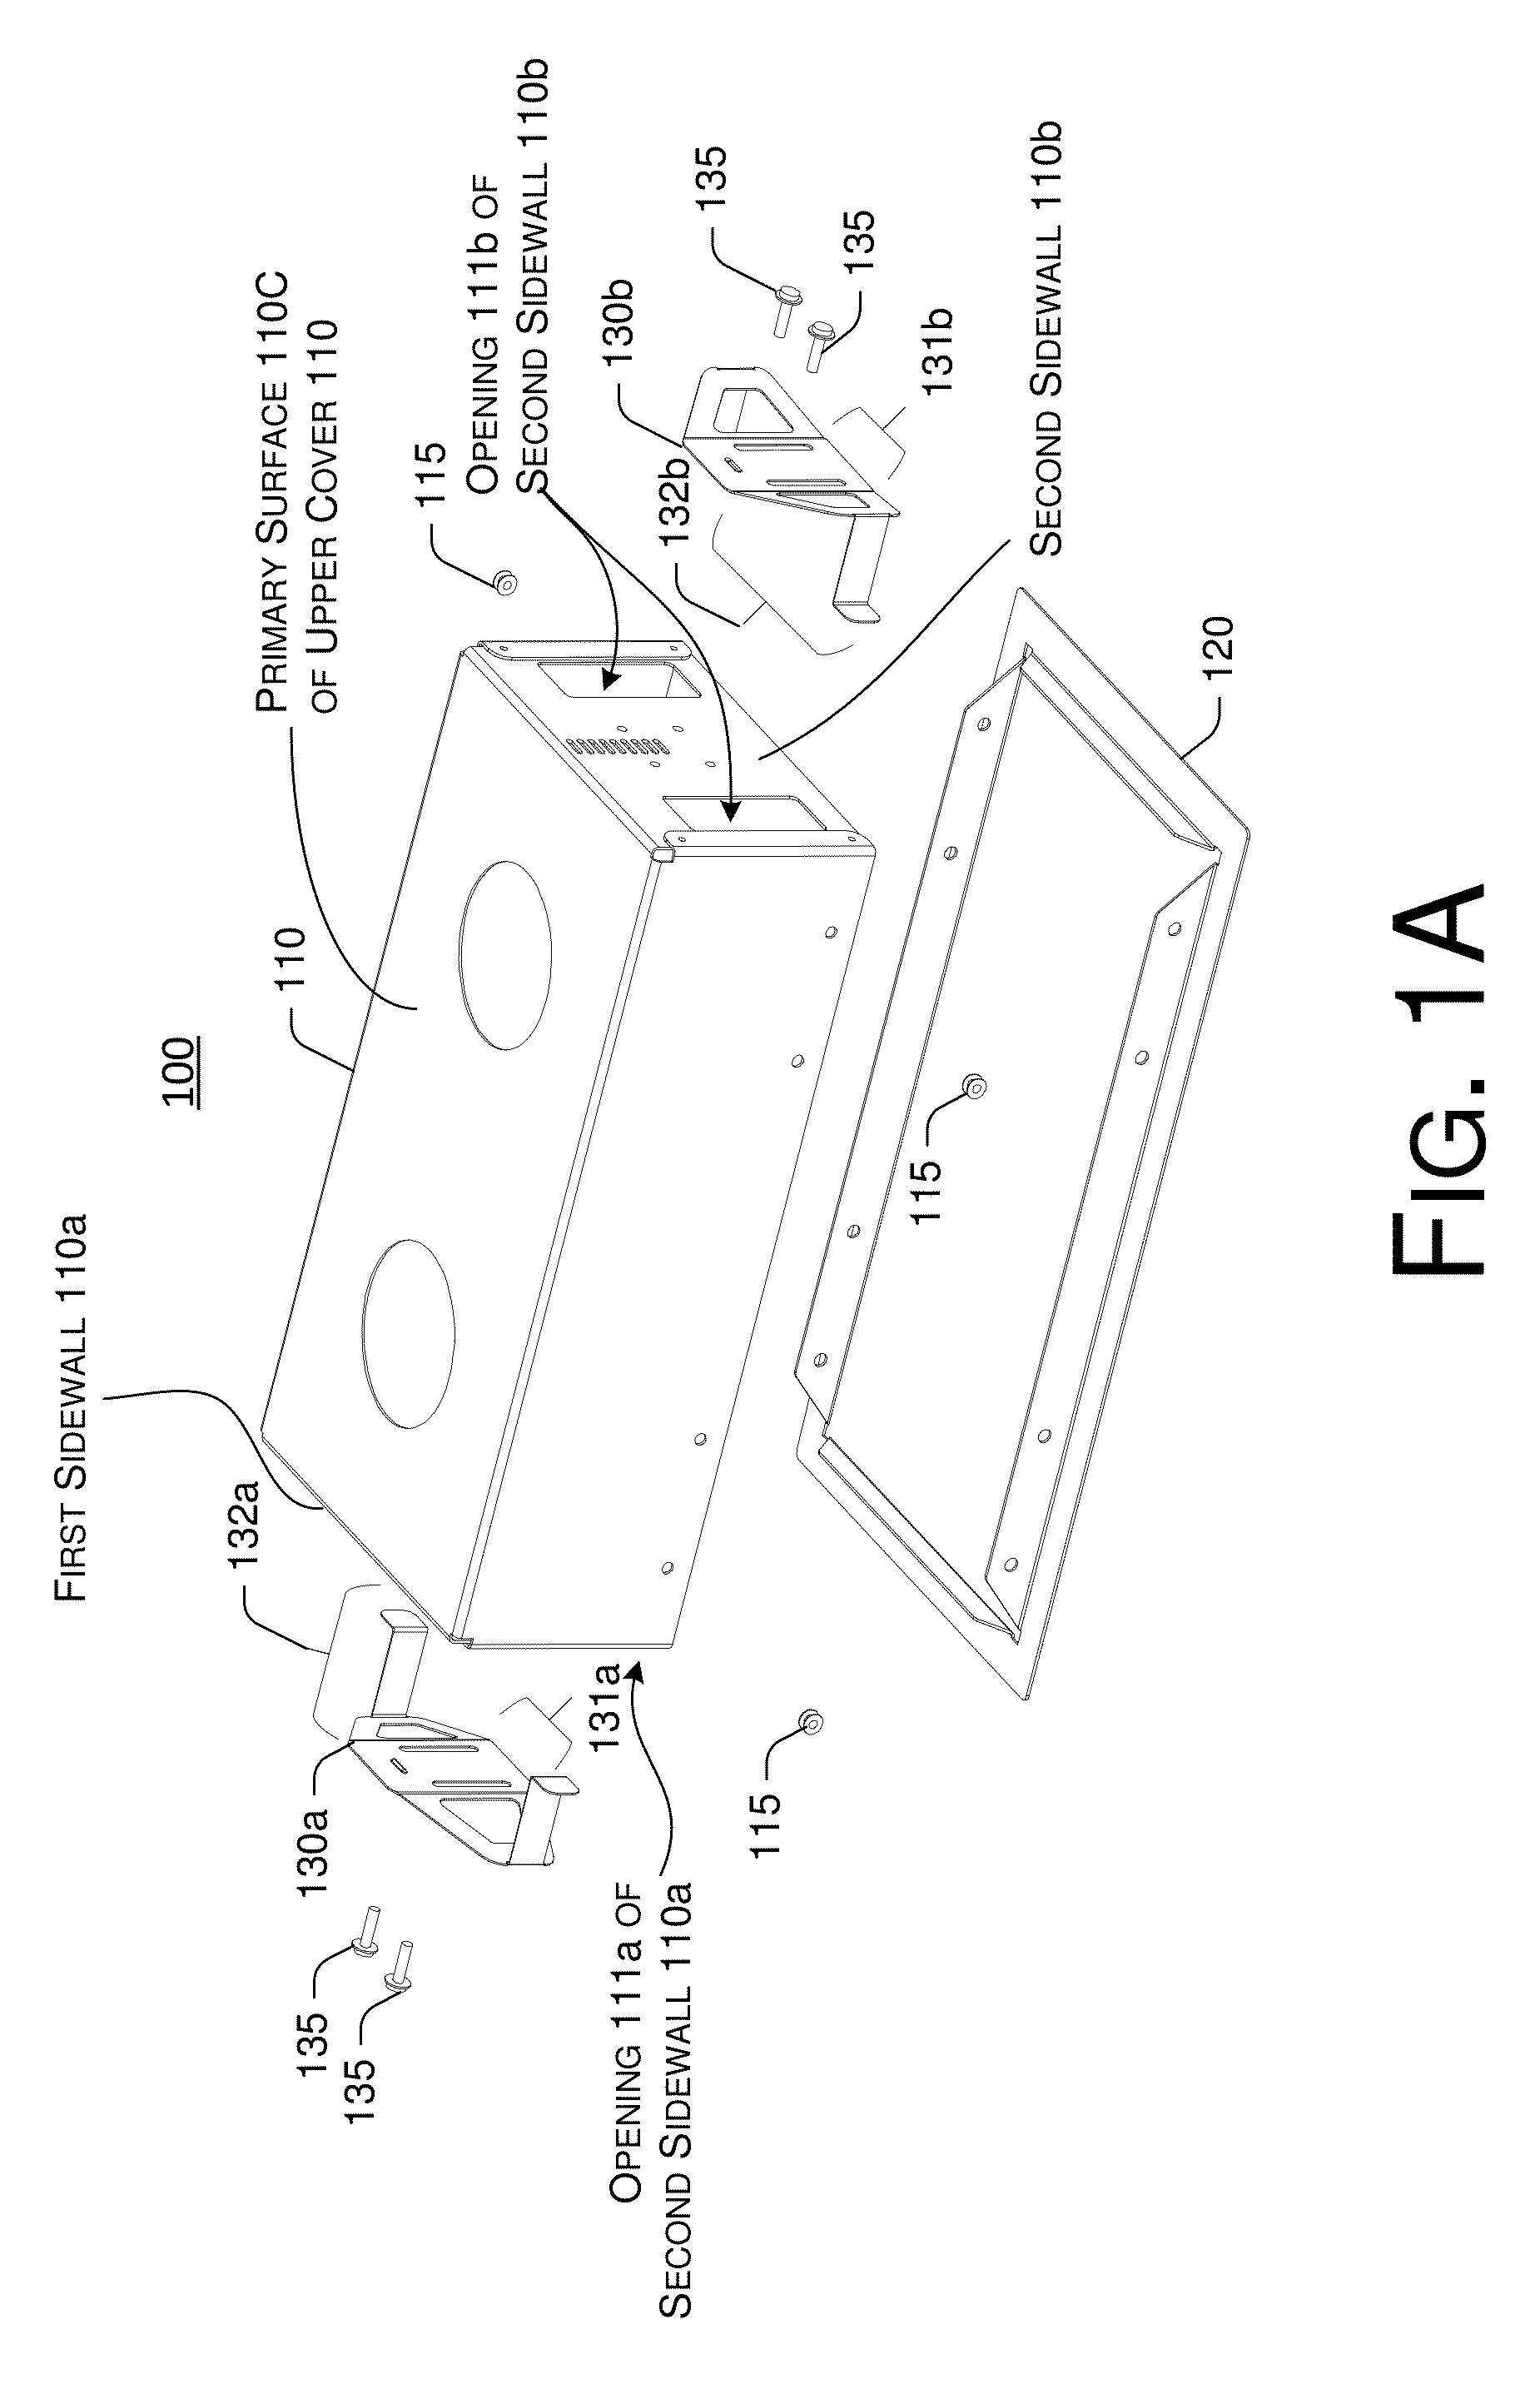 Recessed lamp housing with adjustable spring clipping device